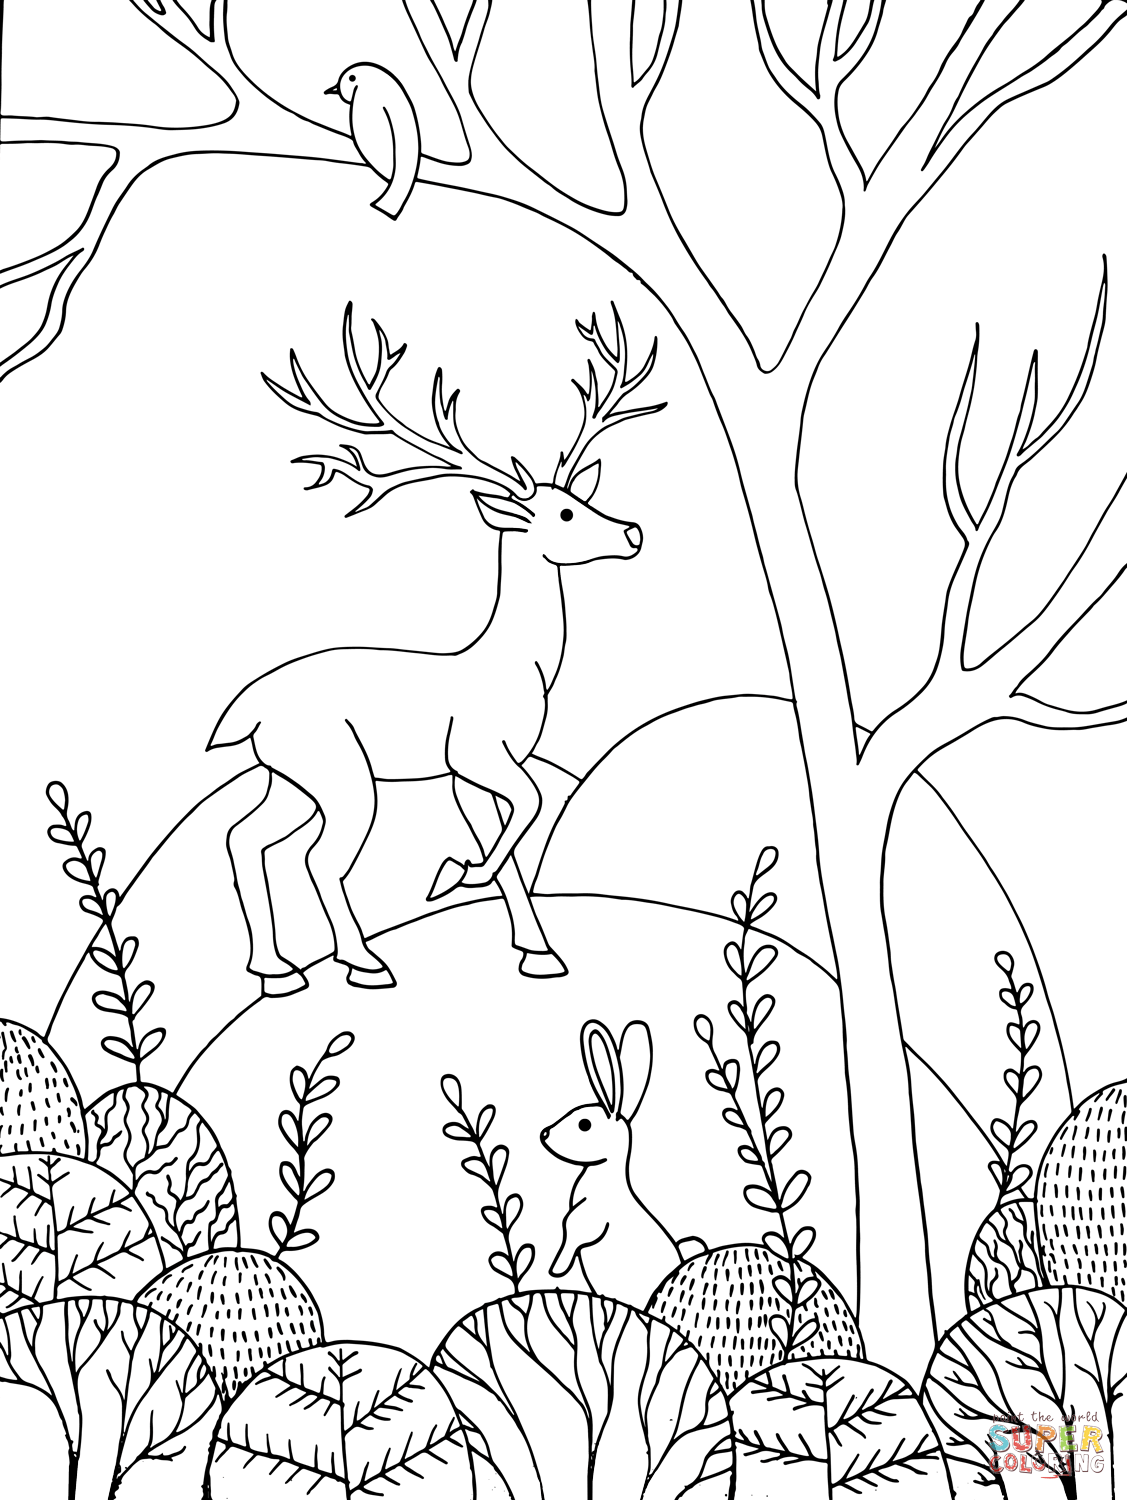 Forest animals in spring coloring page free printable coloring pages